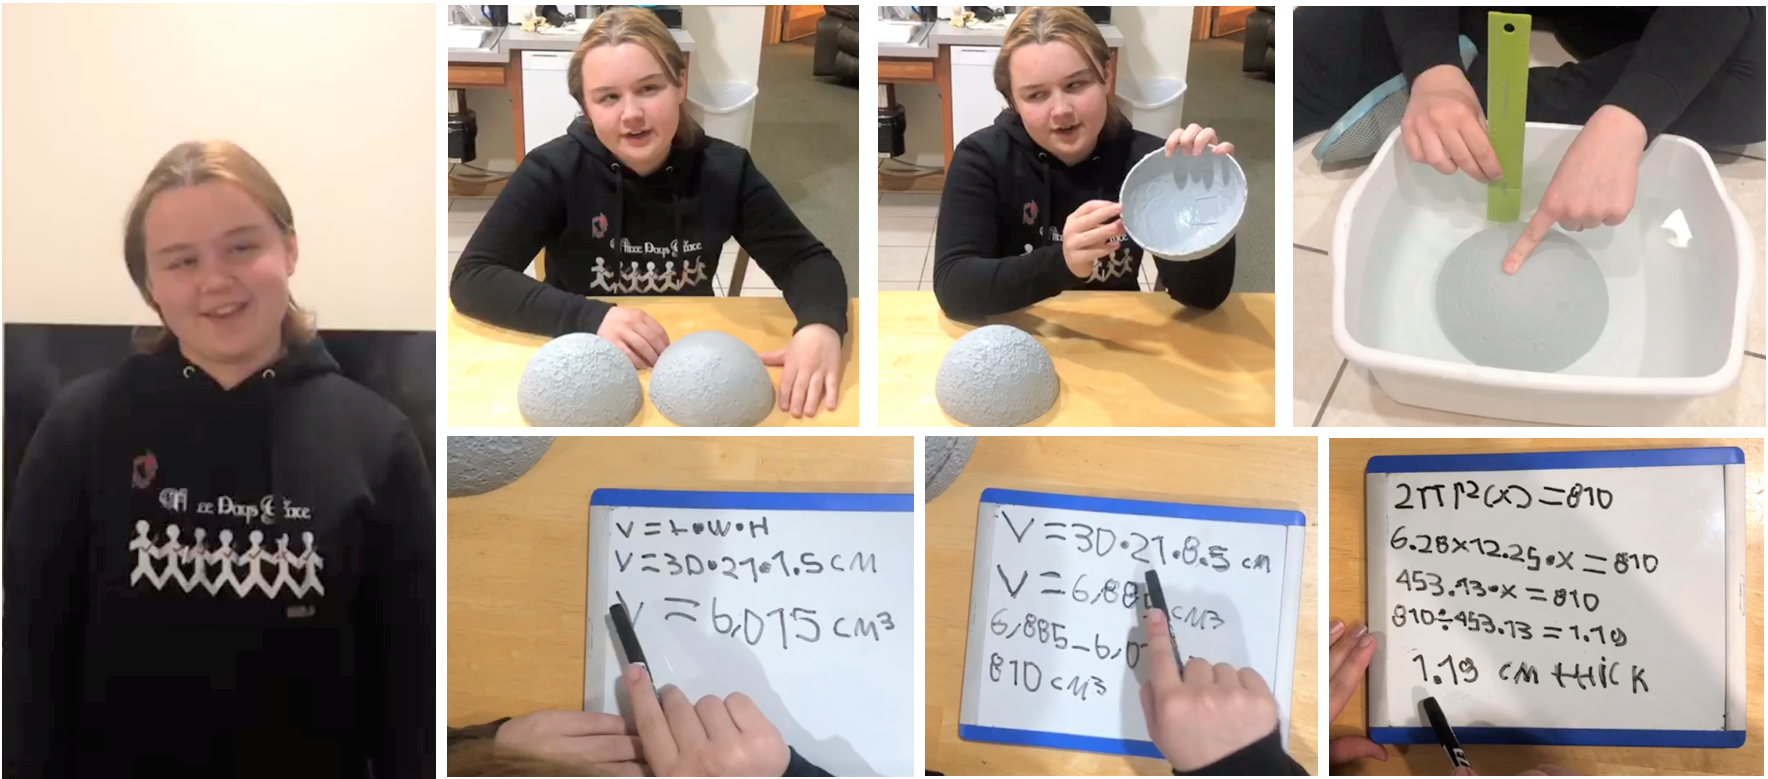 Seven tiled images of the student. One larger image of the student smiling and facing the camera. Two images of the student showing the half hemispheres of the moon, one image demonstrating water displacement with a water basin, and three images of the student calculating the thickness of the crust using a marker and whiteboard.